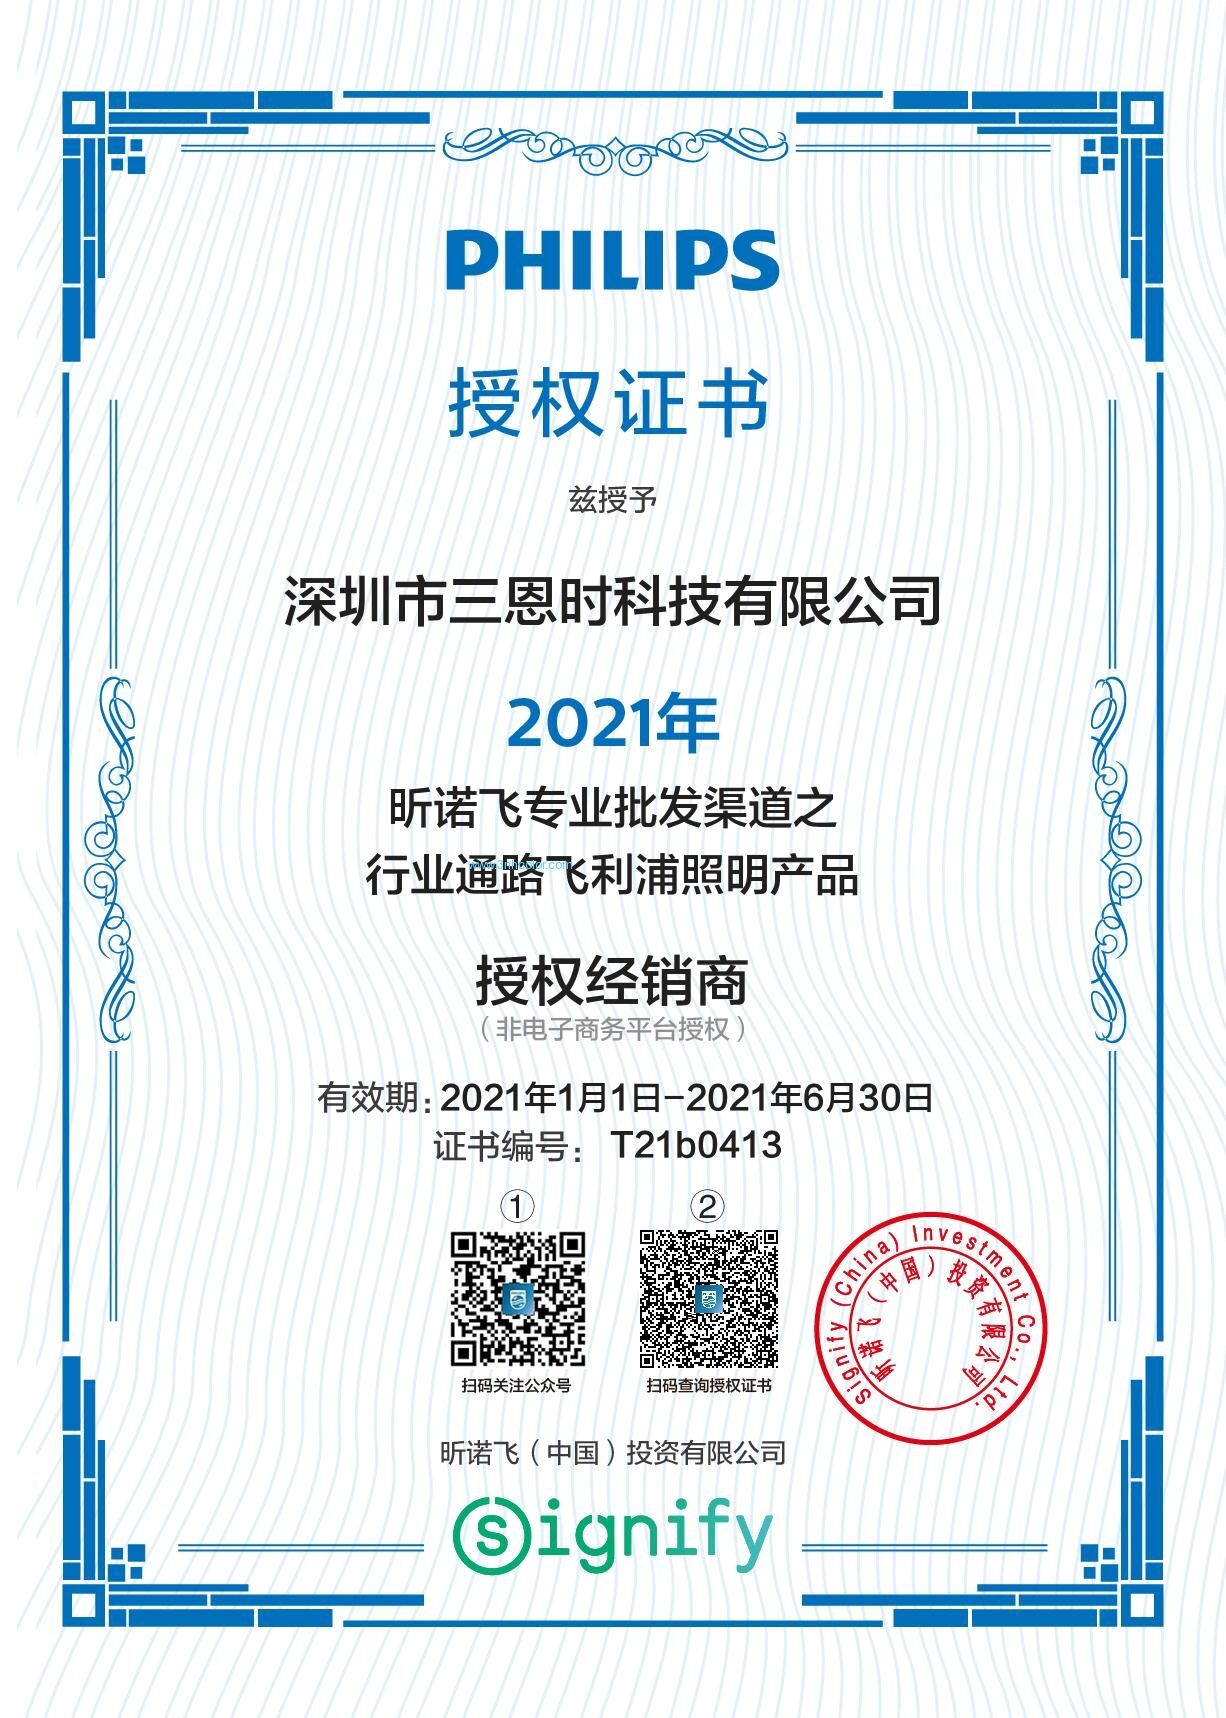 Philips Authorized Agent In China in 2021